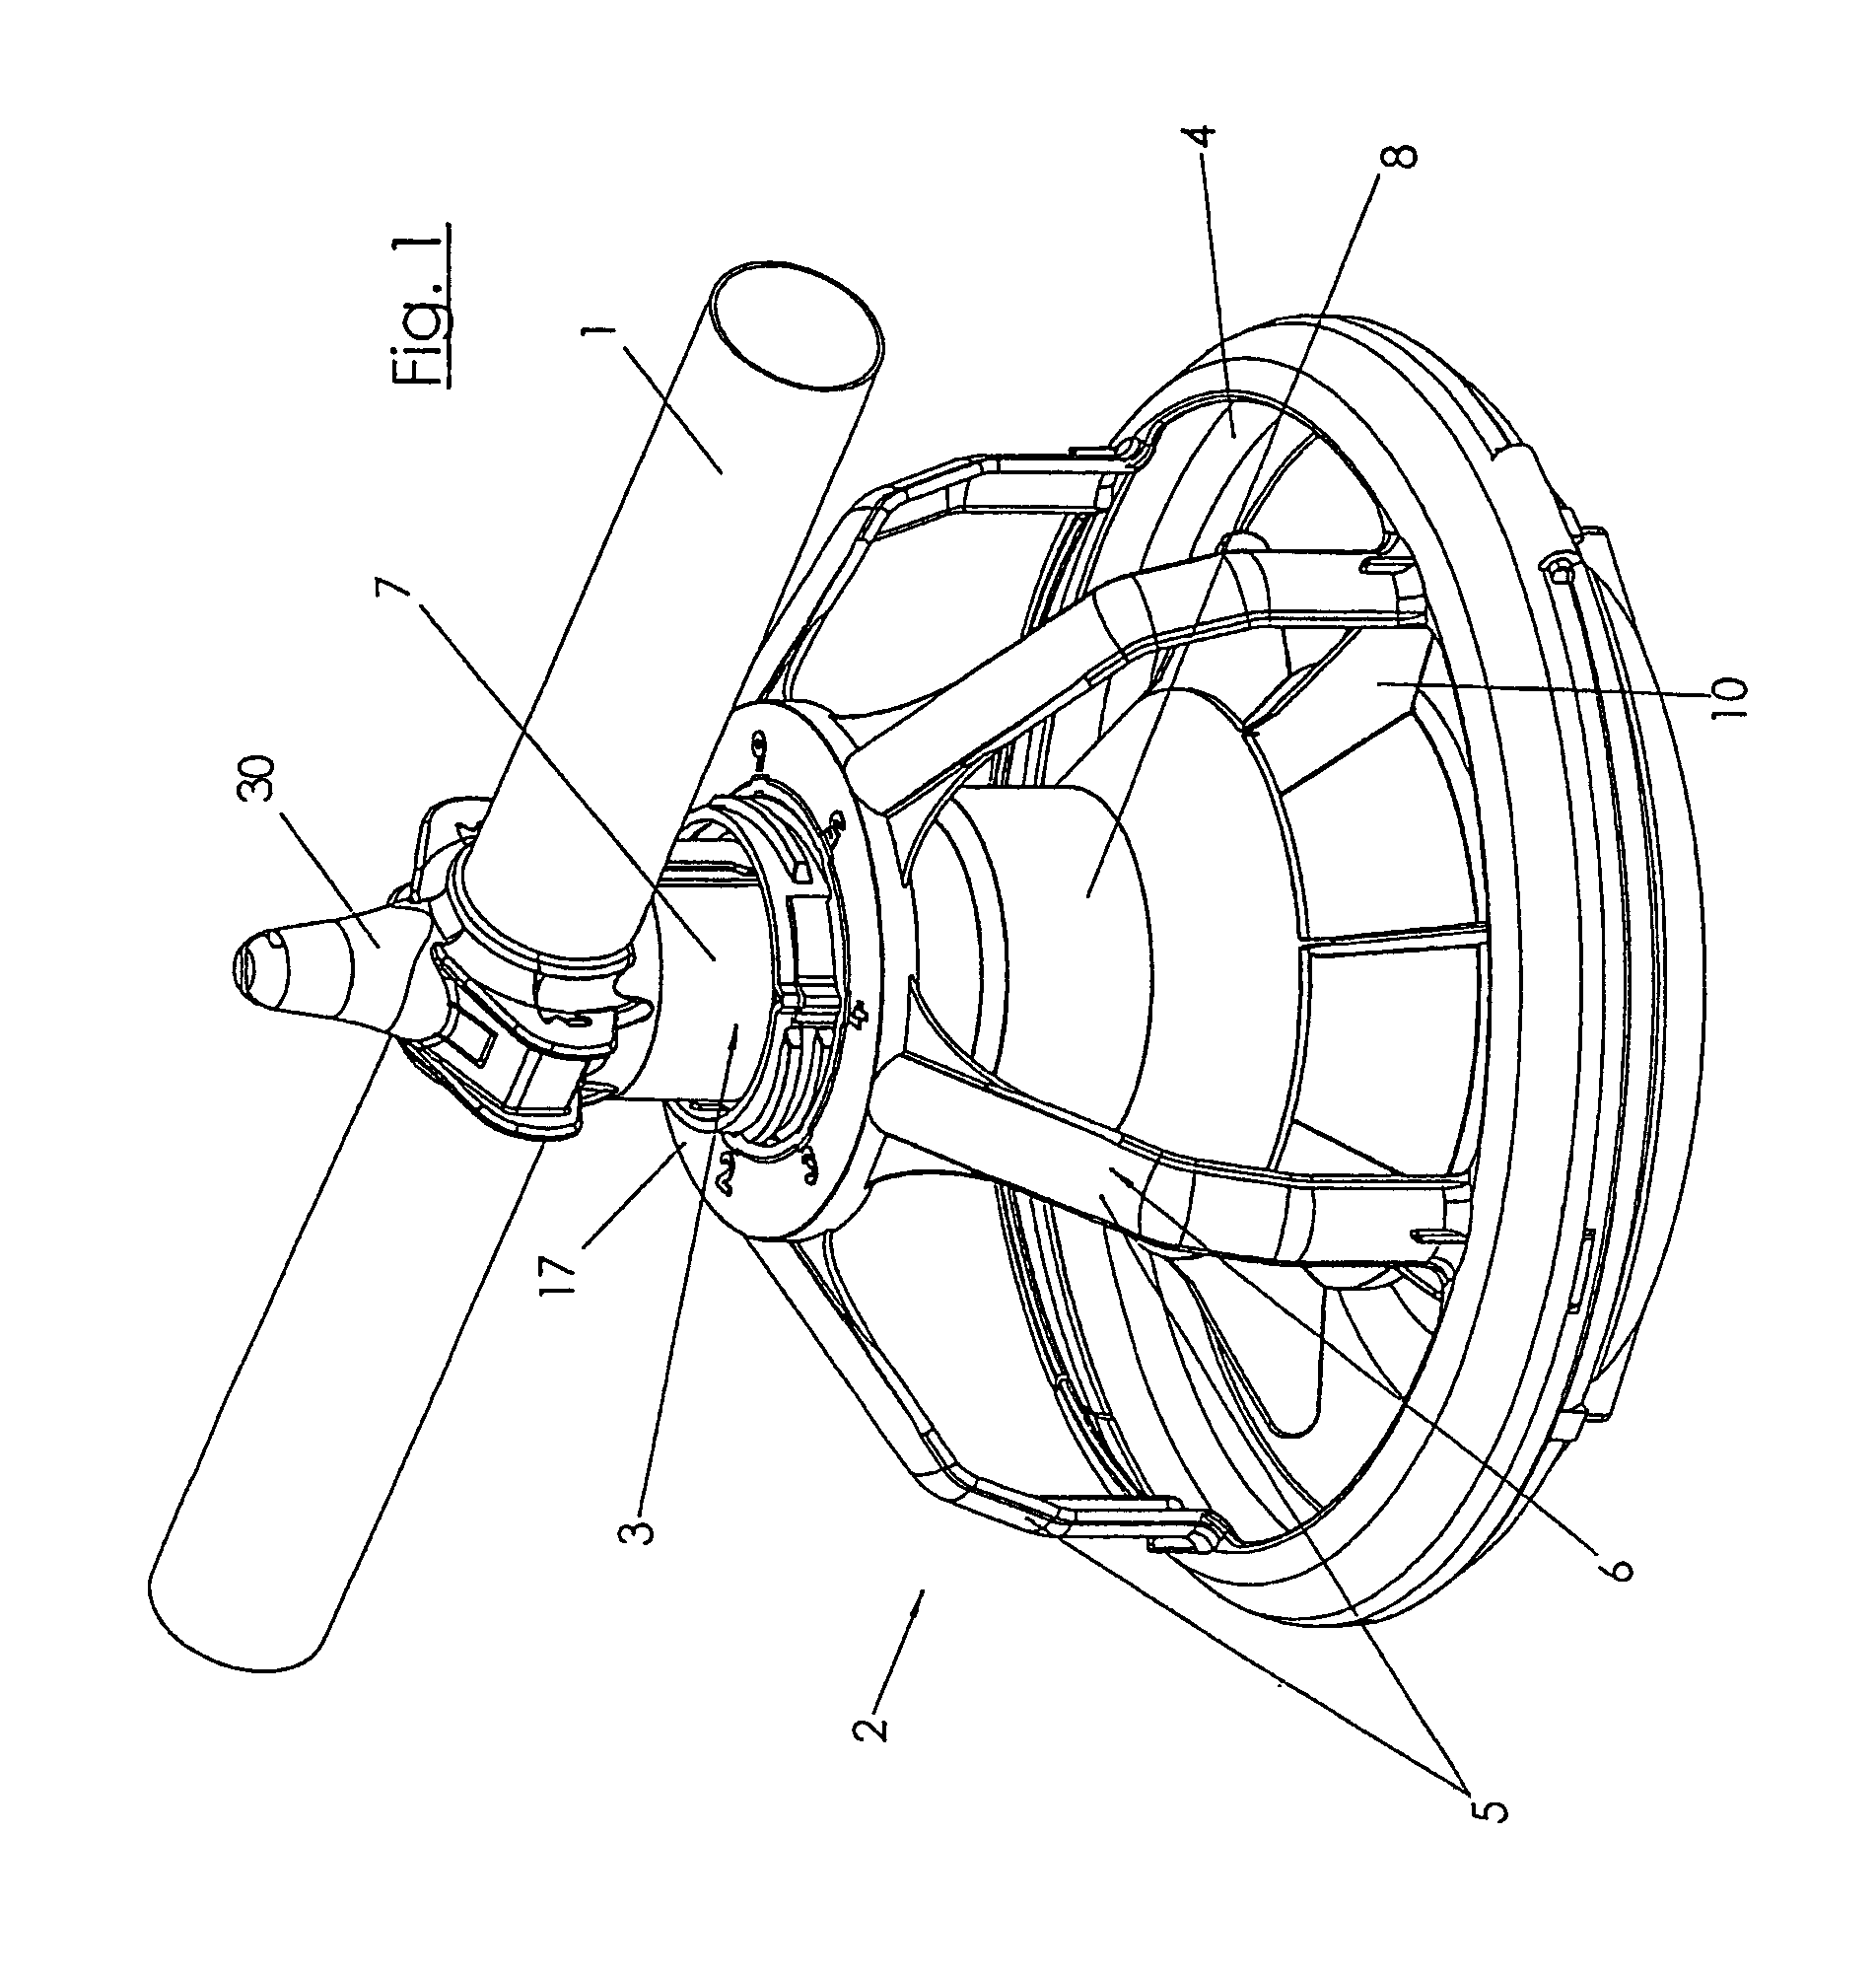 Device for feeding poultry in particular fattening poultry, preferably broilers